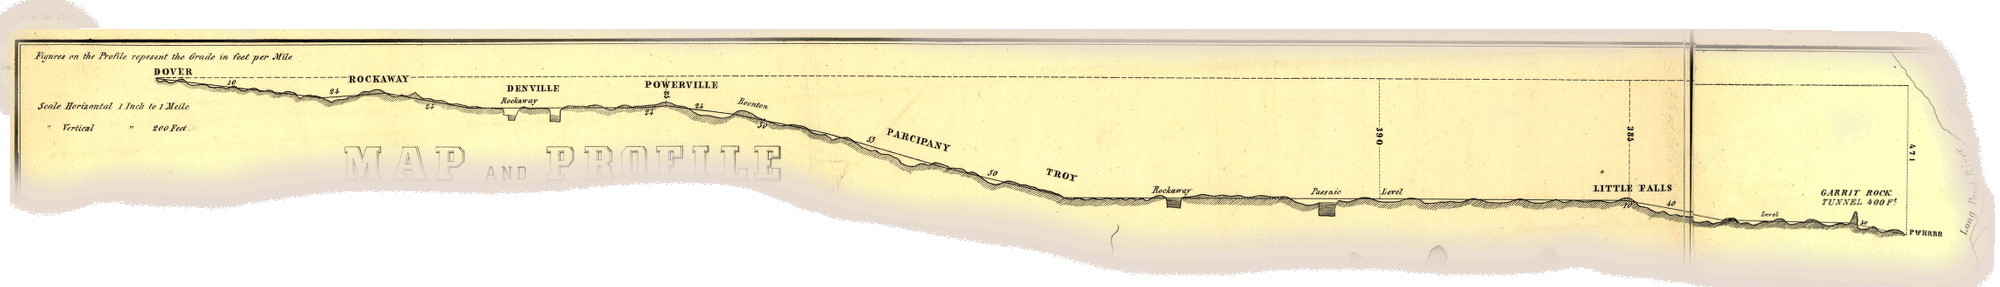 Map and Profile of the Proposed Paterson and Dover Rail Road and Paterson and Ramapo Railroad as surveyed by J.W. Allen, 1847